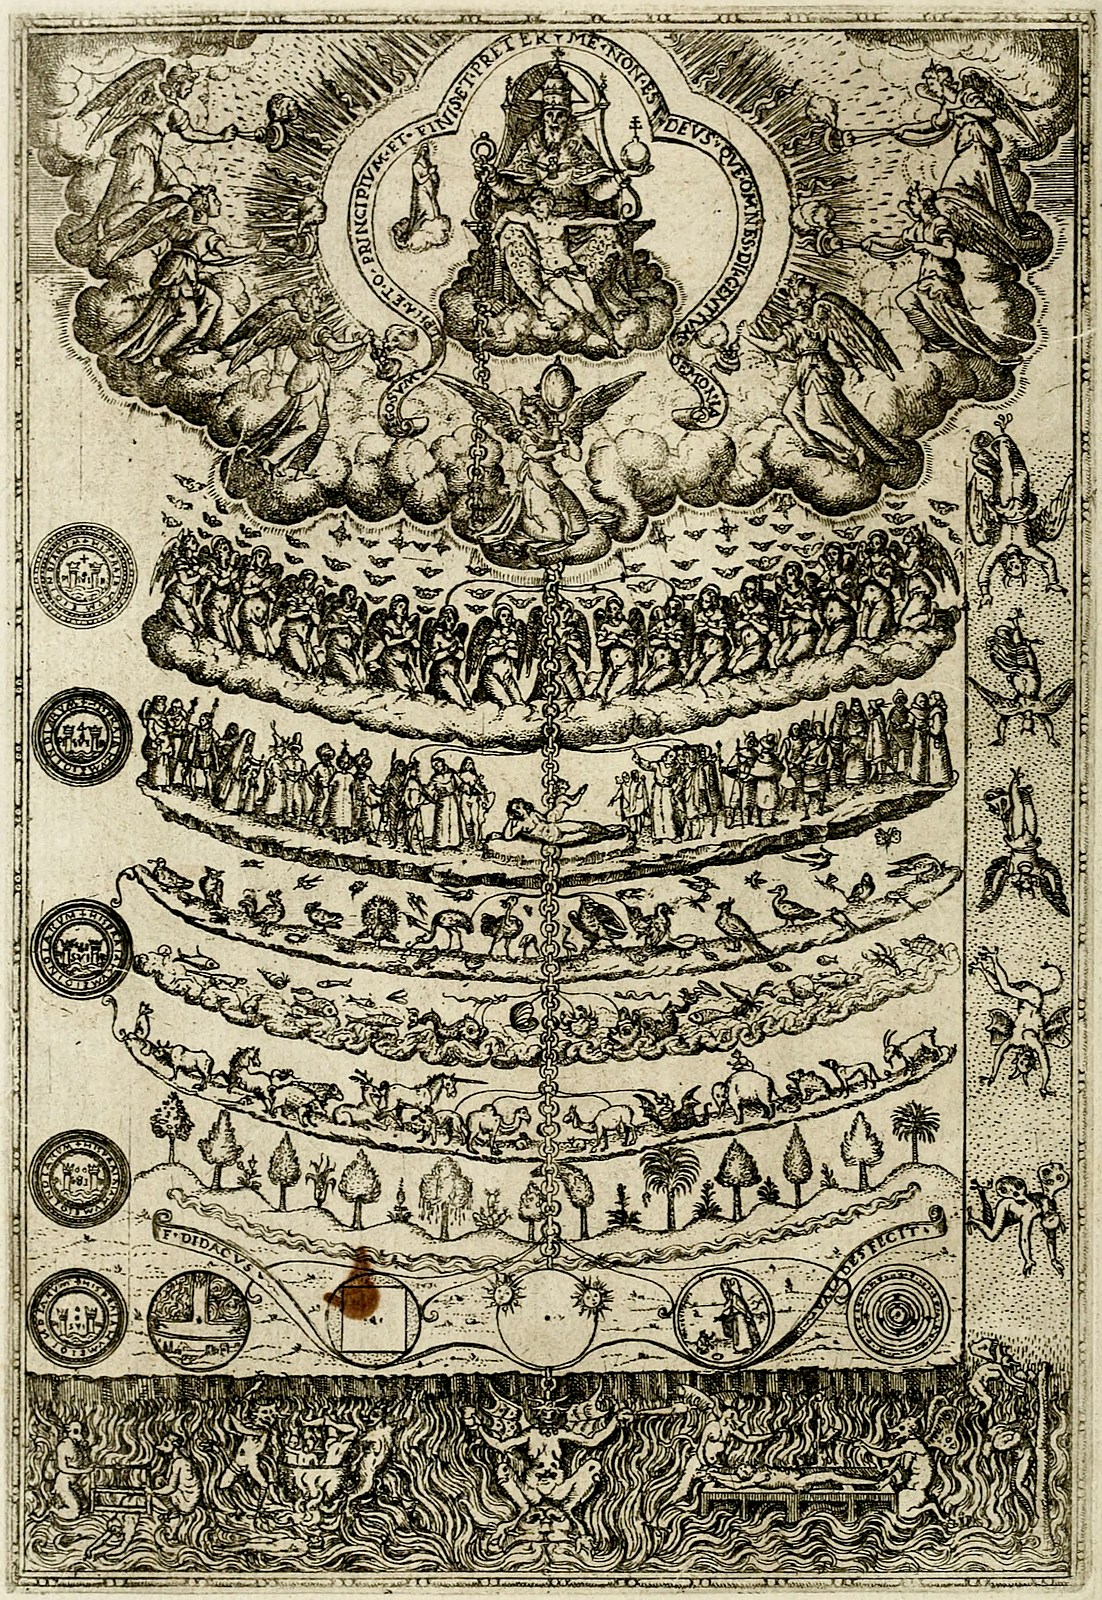 The Great Chain of Being, as illustrated by Didacus Valades, <i>Rhetorica Christiana</i> (1579) (source: <a href="http://www.jasonbengtson.com/earlymodern/index.html#">Early Modern Word and Image</a>) In this scheme, minerals and other inanimate objects rank lowest in the natural order. Plants sit slightly higher due to their capacity for growth. Animals can move, sense and respond to the world around them, granting them a higher status on the Chain. Yet humans are the only natural creatures with the capacity for reason or a soul, allowing us to achieve salvation in Heaven. Angels, which lack material bodies and so cannot commit physical sins, stand above humans. God, the creator of the universe, presides at the top of the Chain outside of time and space. 